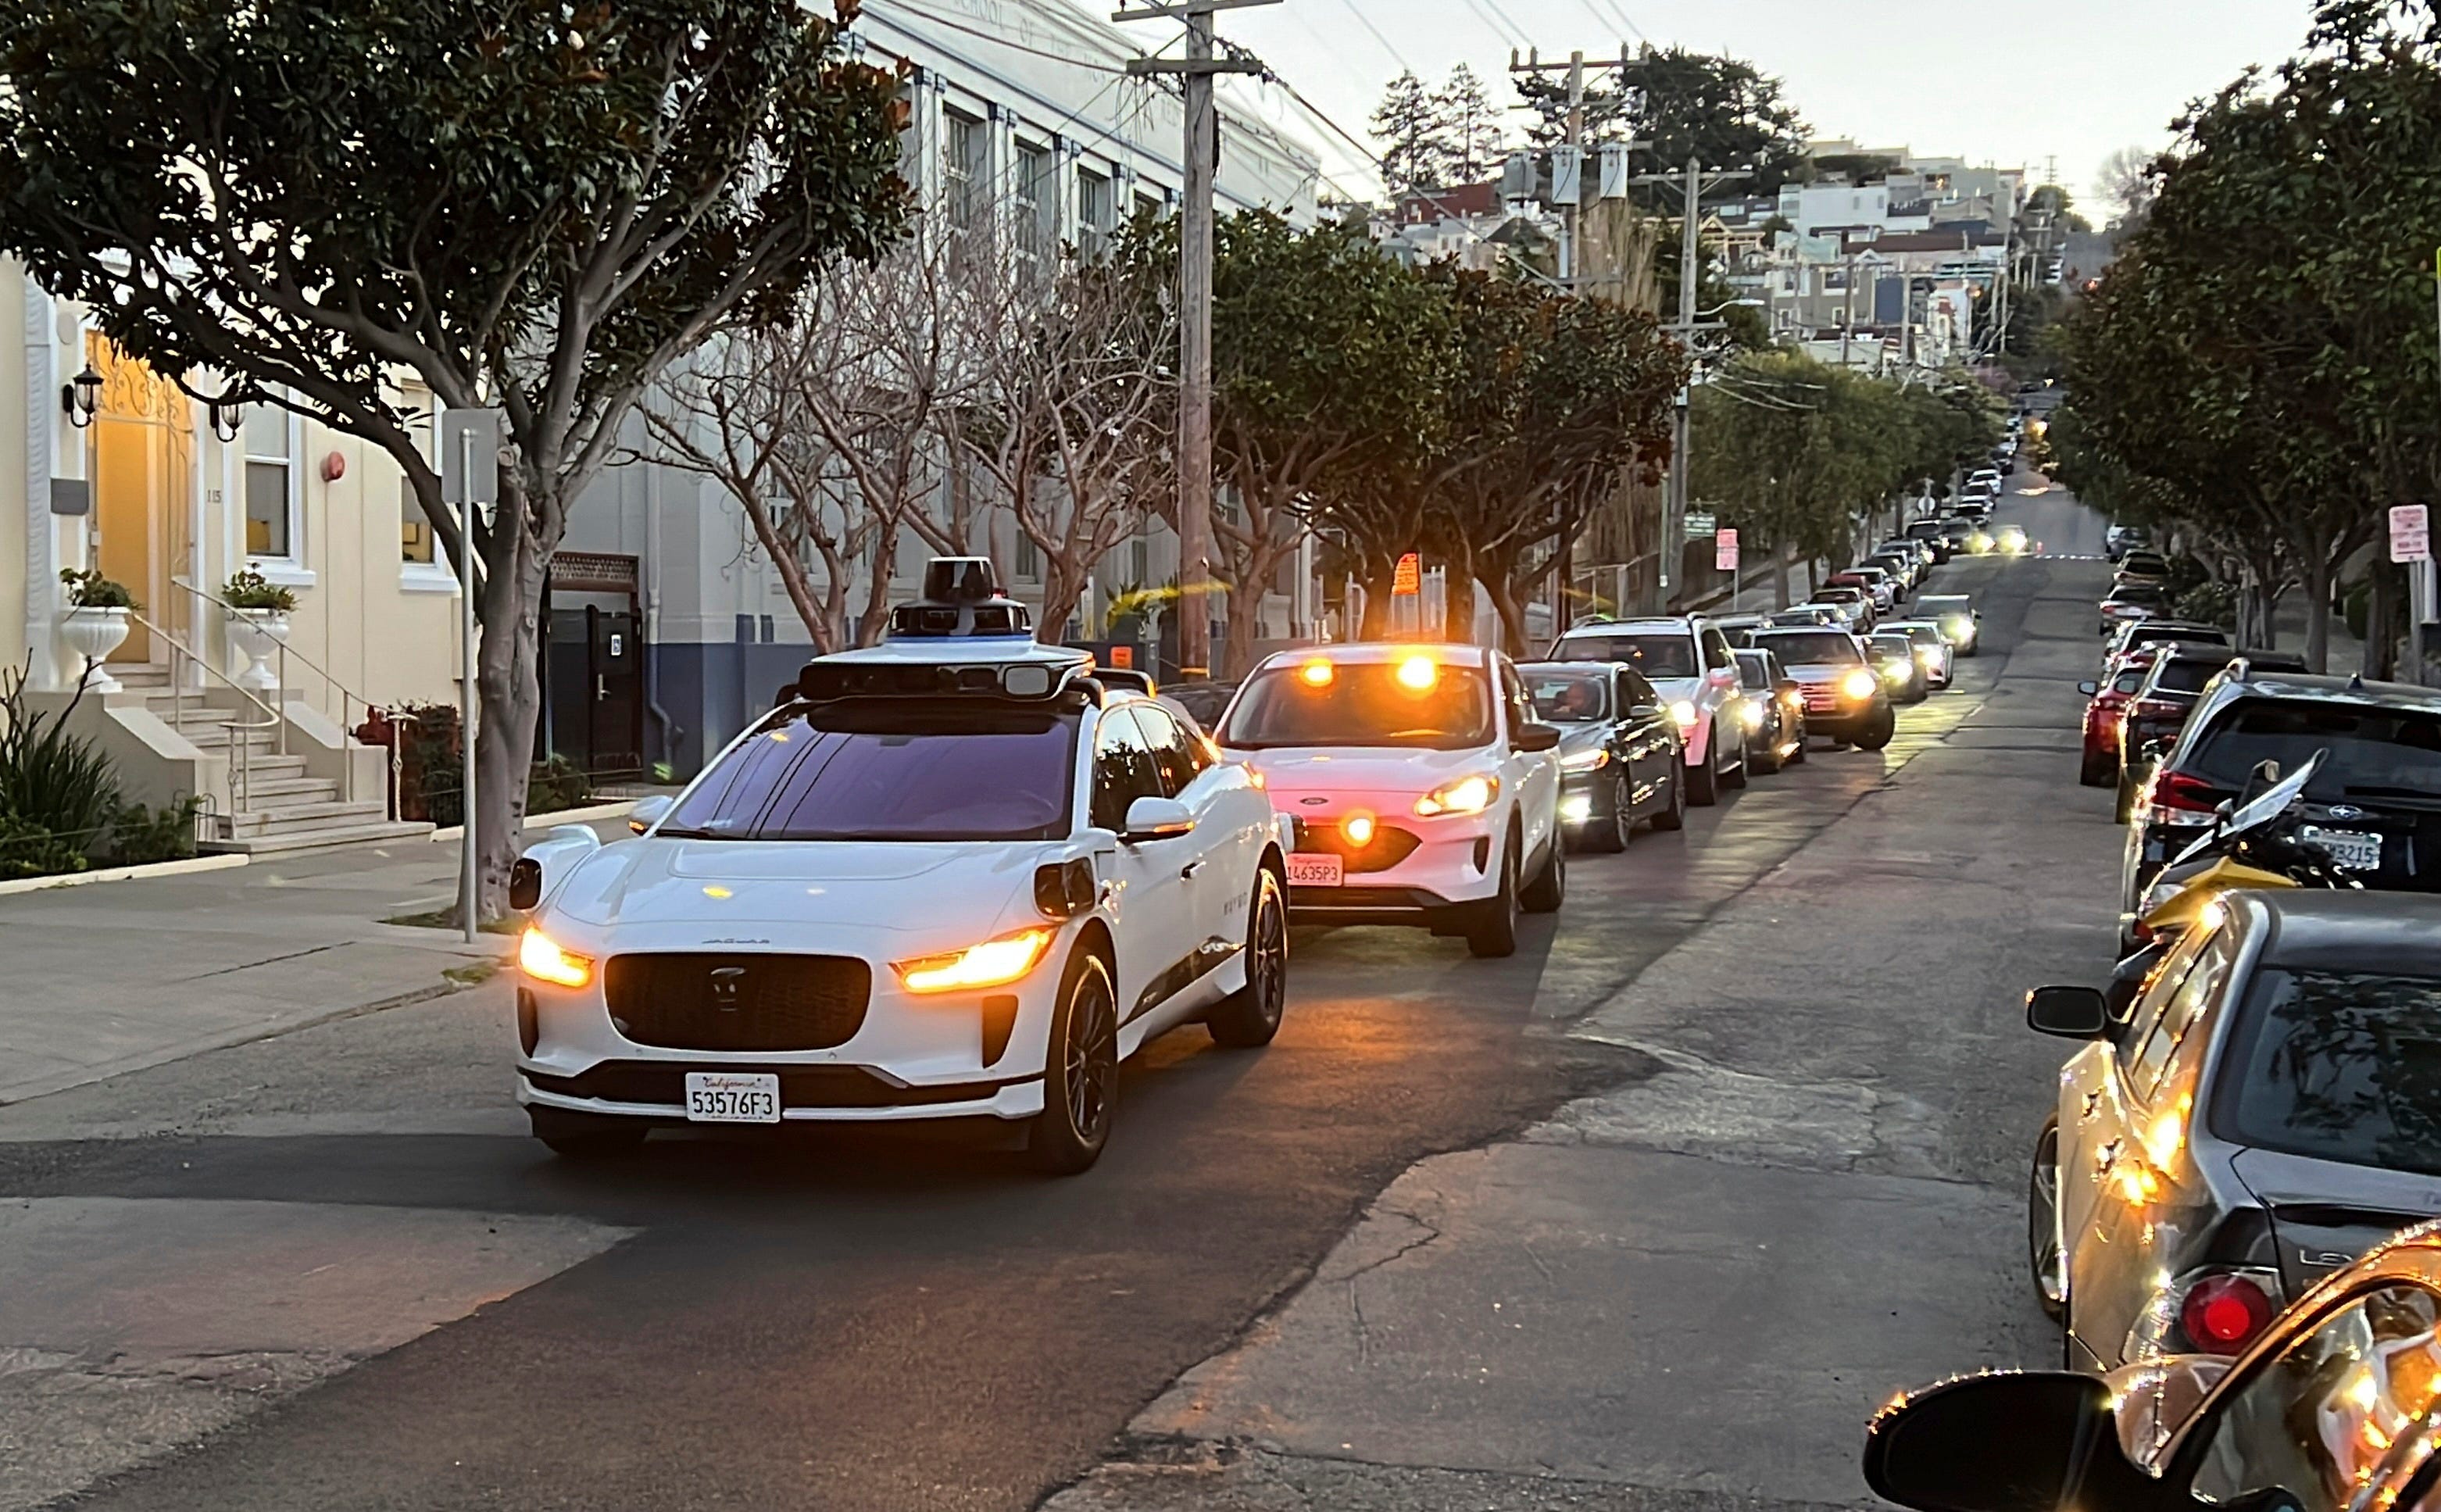 a white car blocks a line of cars waiting behind it on a city street. It's a Waymo self-driving taxi.